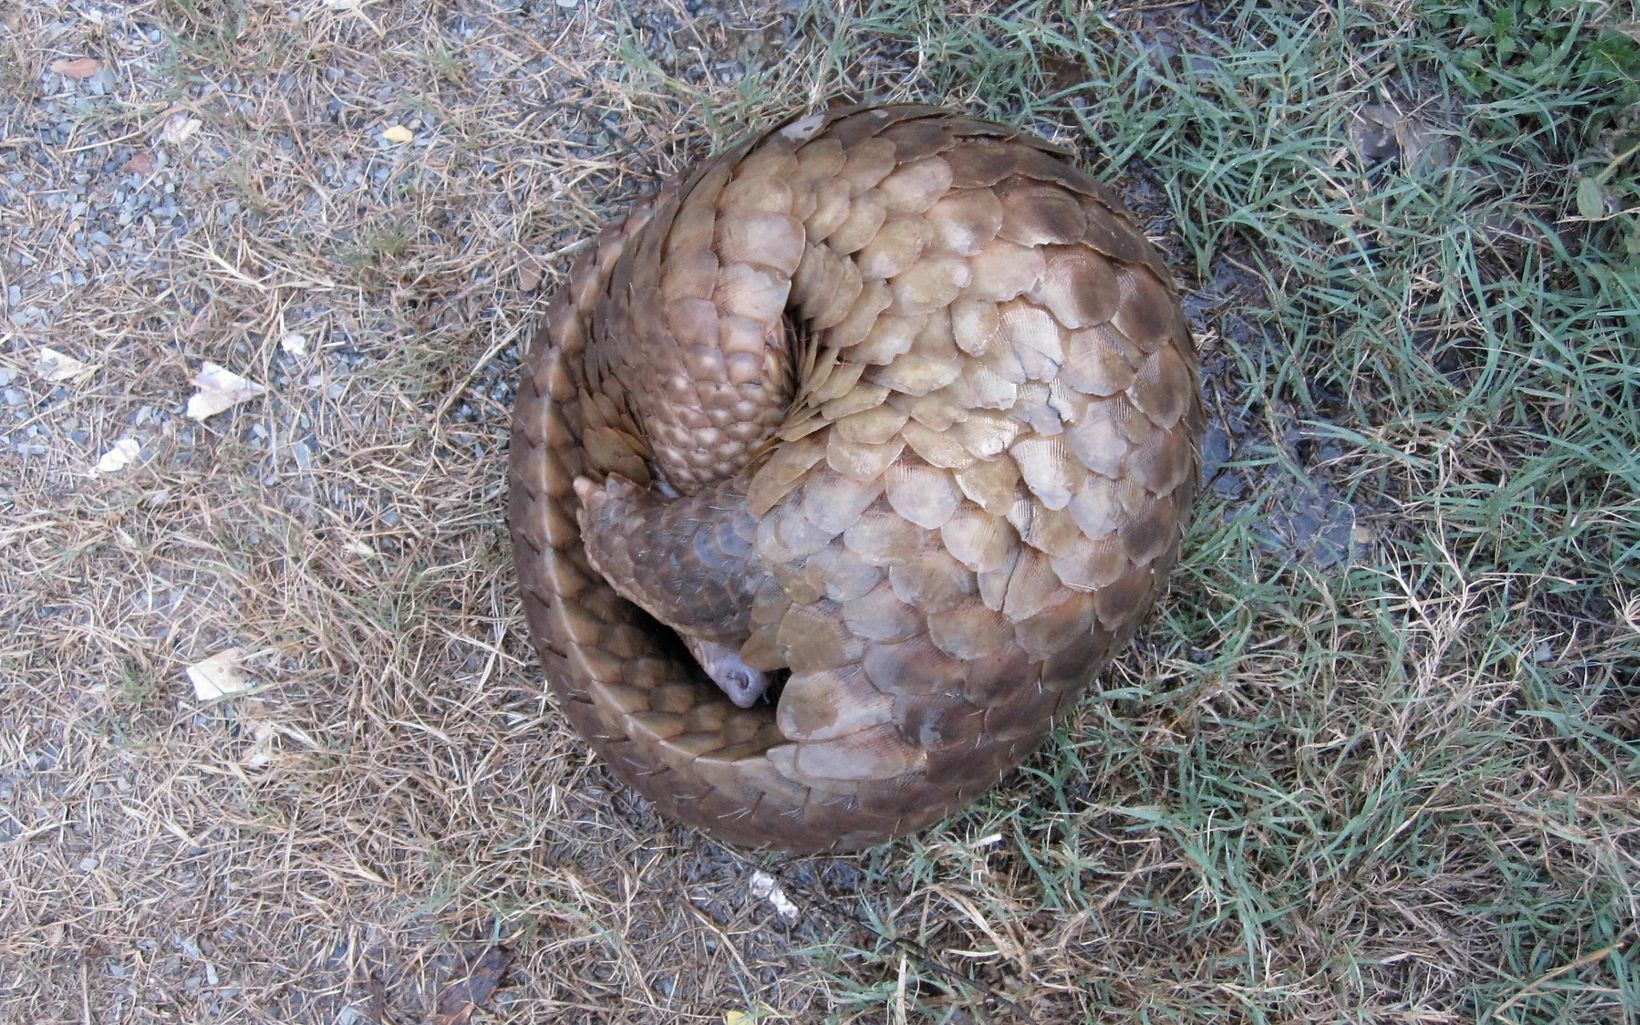 a scaly animal curled up on the ground